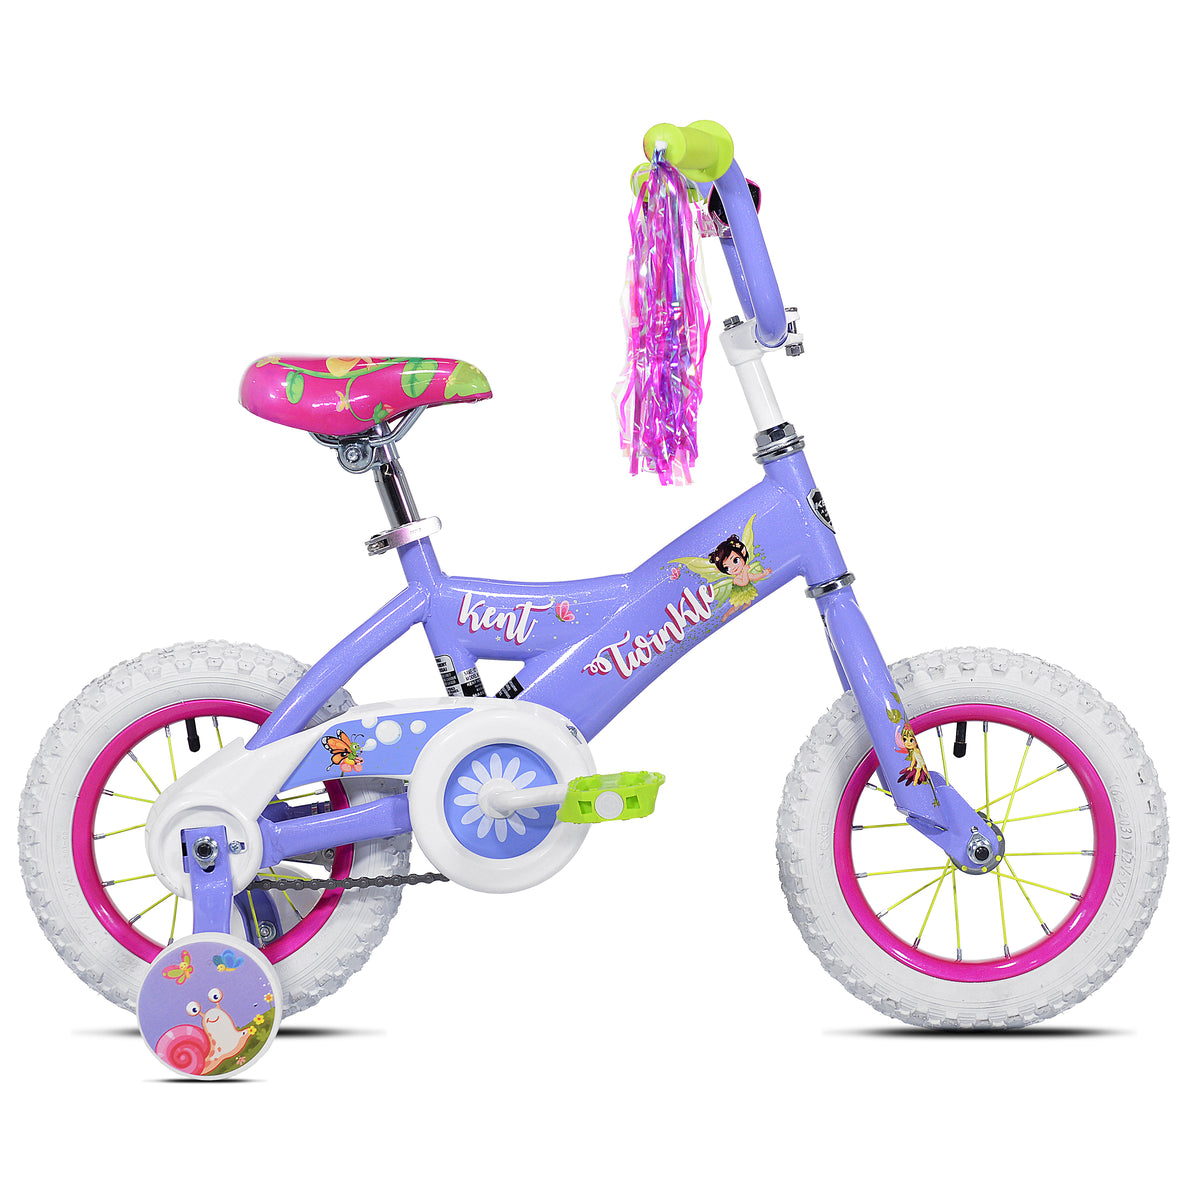 12" Kent Twinkle | Bike for Kids Ages 2-4